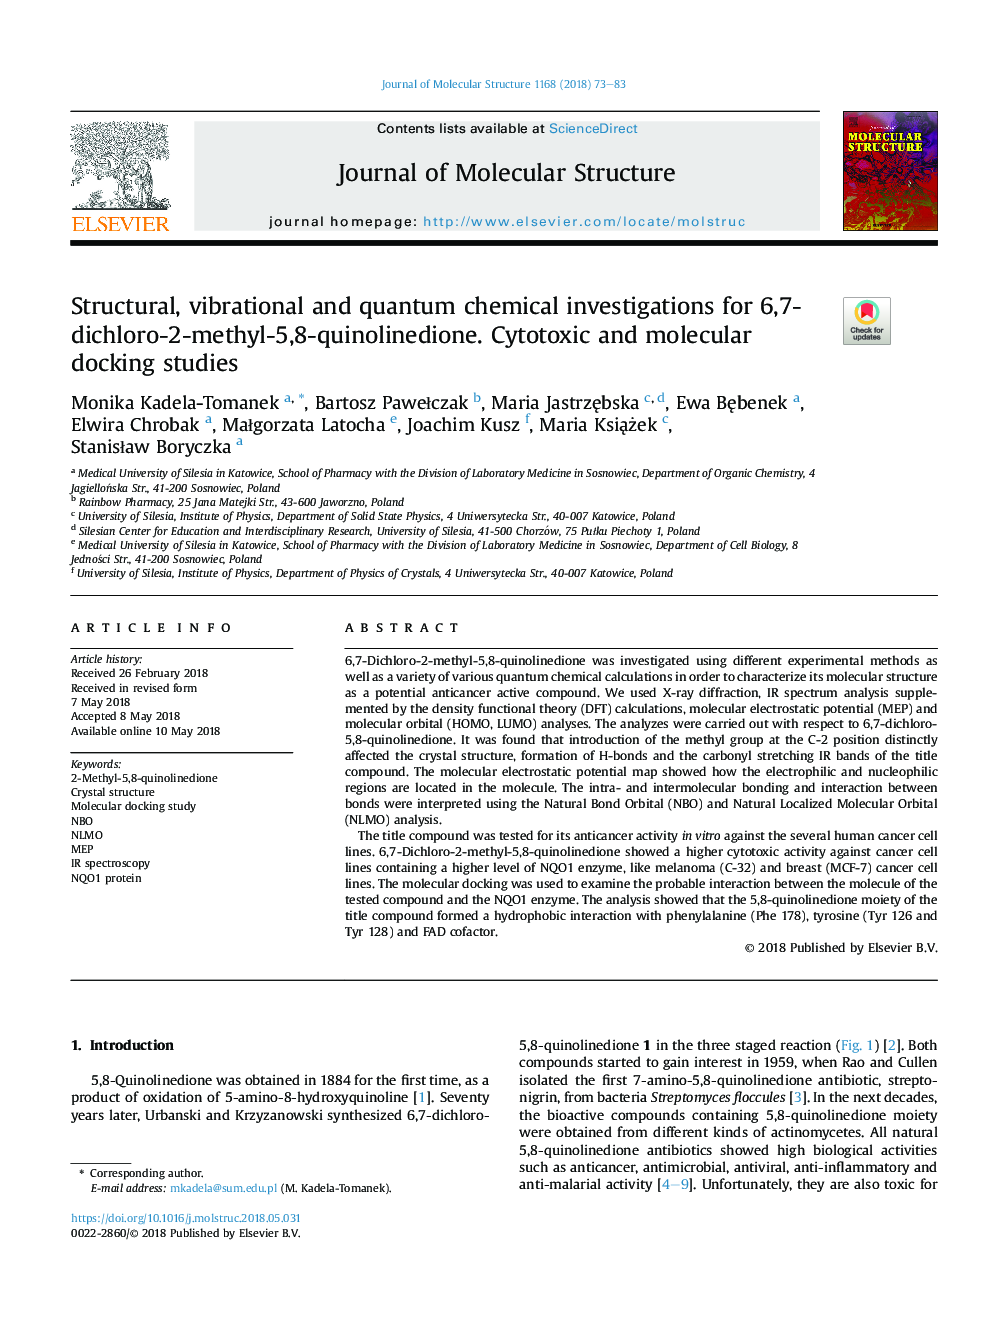 Structural, vibrational and quantum chemical investigations for 6,7-dichloro-2-methyl-5,8-quinolinedione. Cytotoxic and molecular docking studies